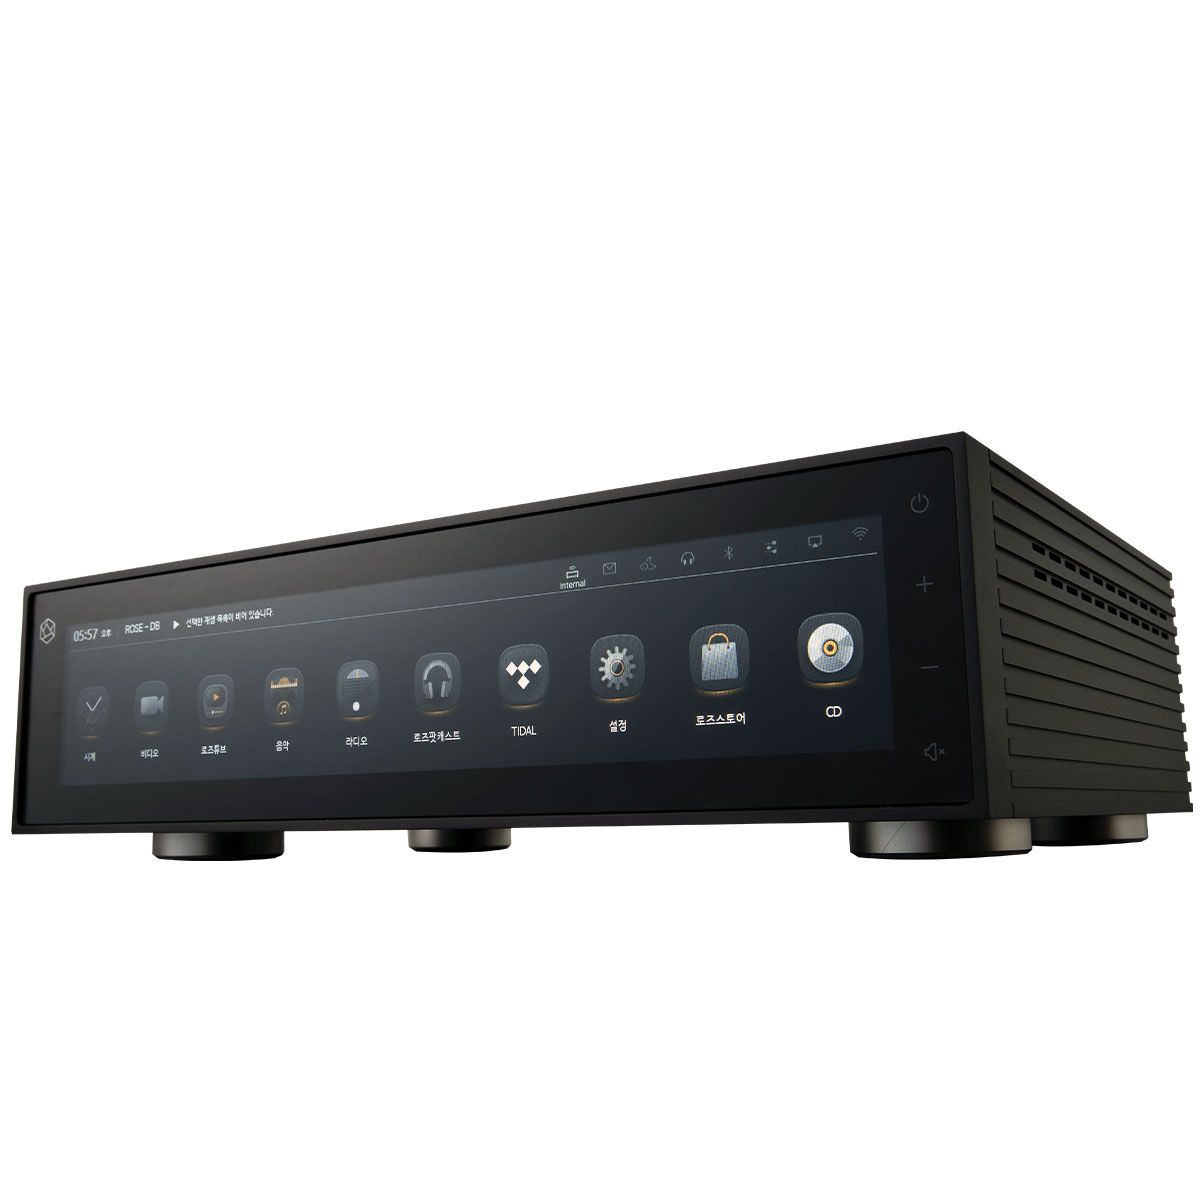 Close shot of the HIFI Rose RS150 Reference Network Streamer Front Panel in Black.